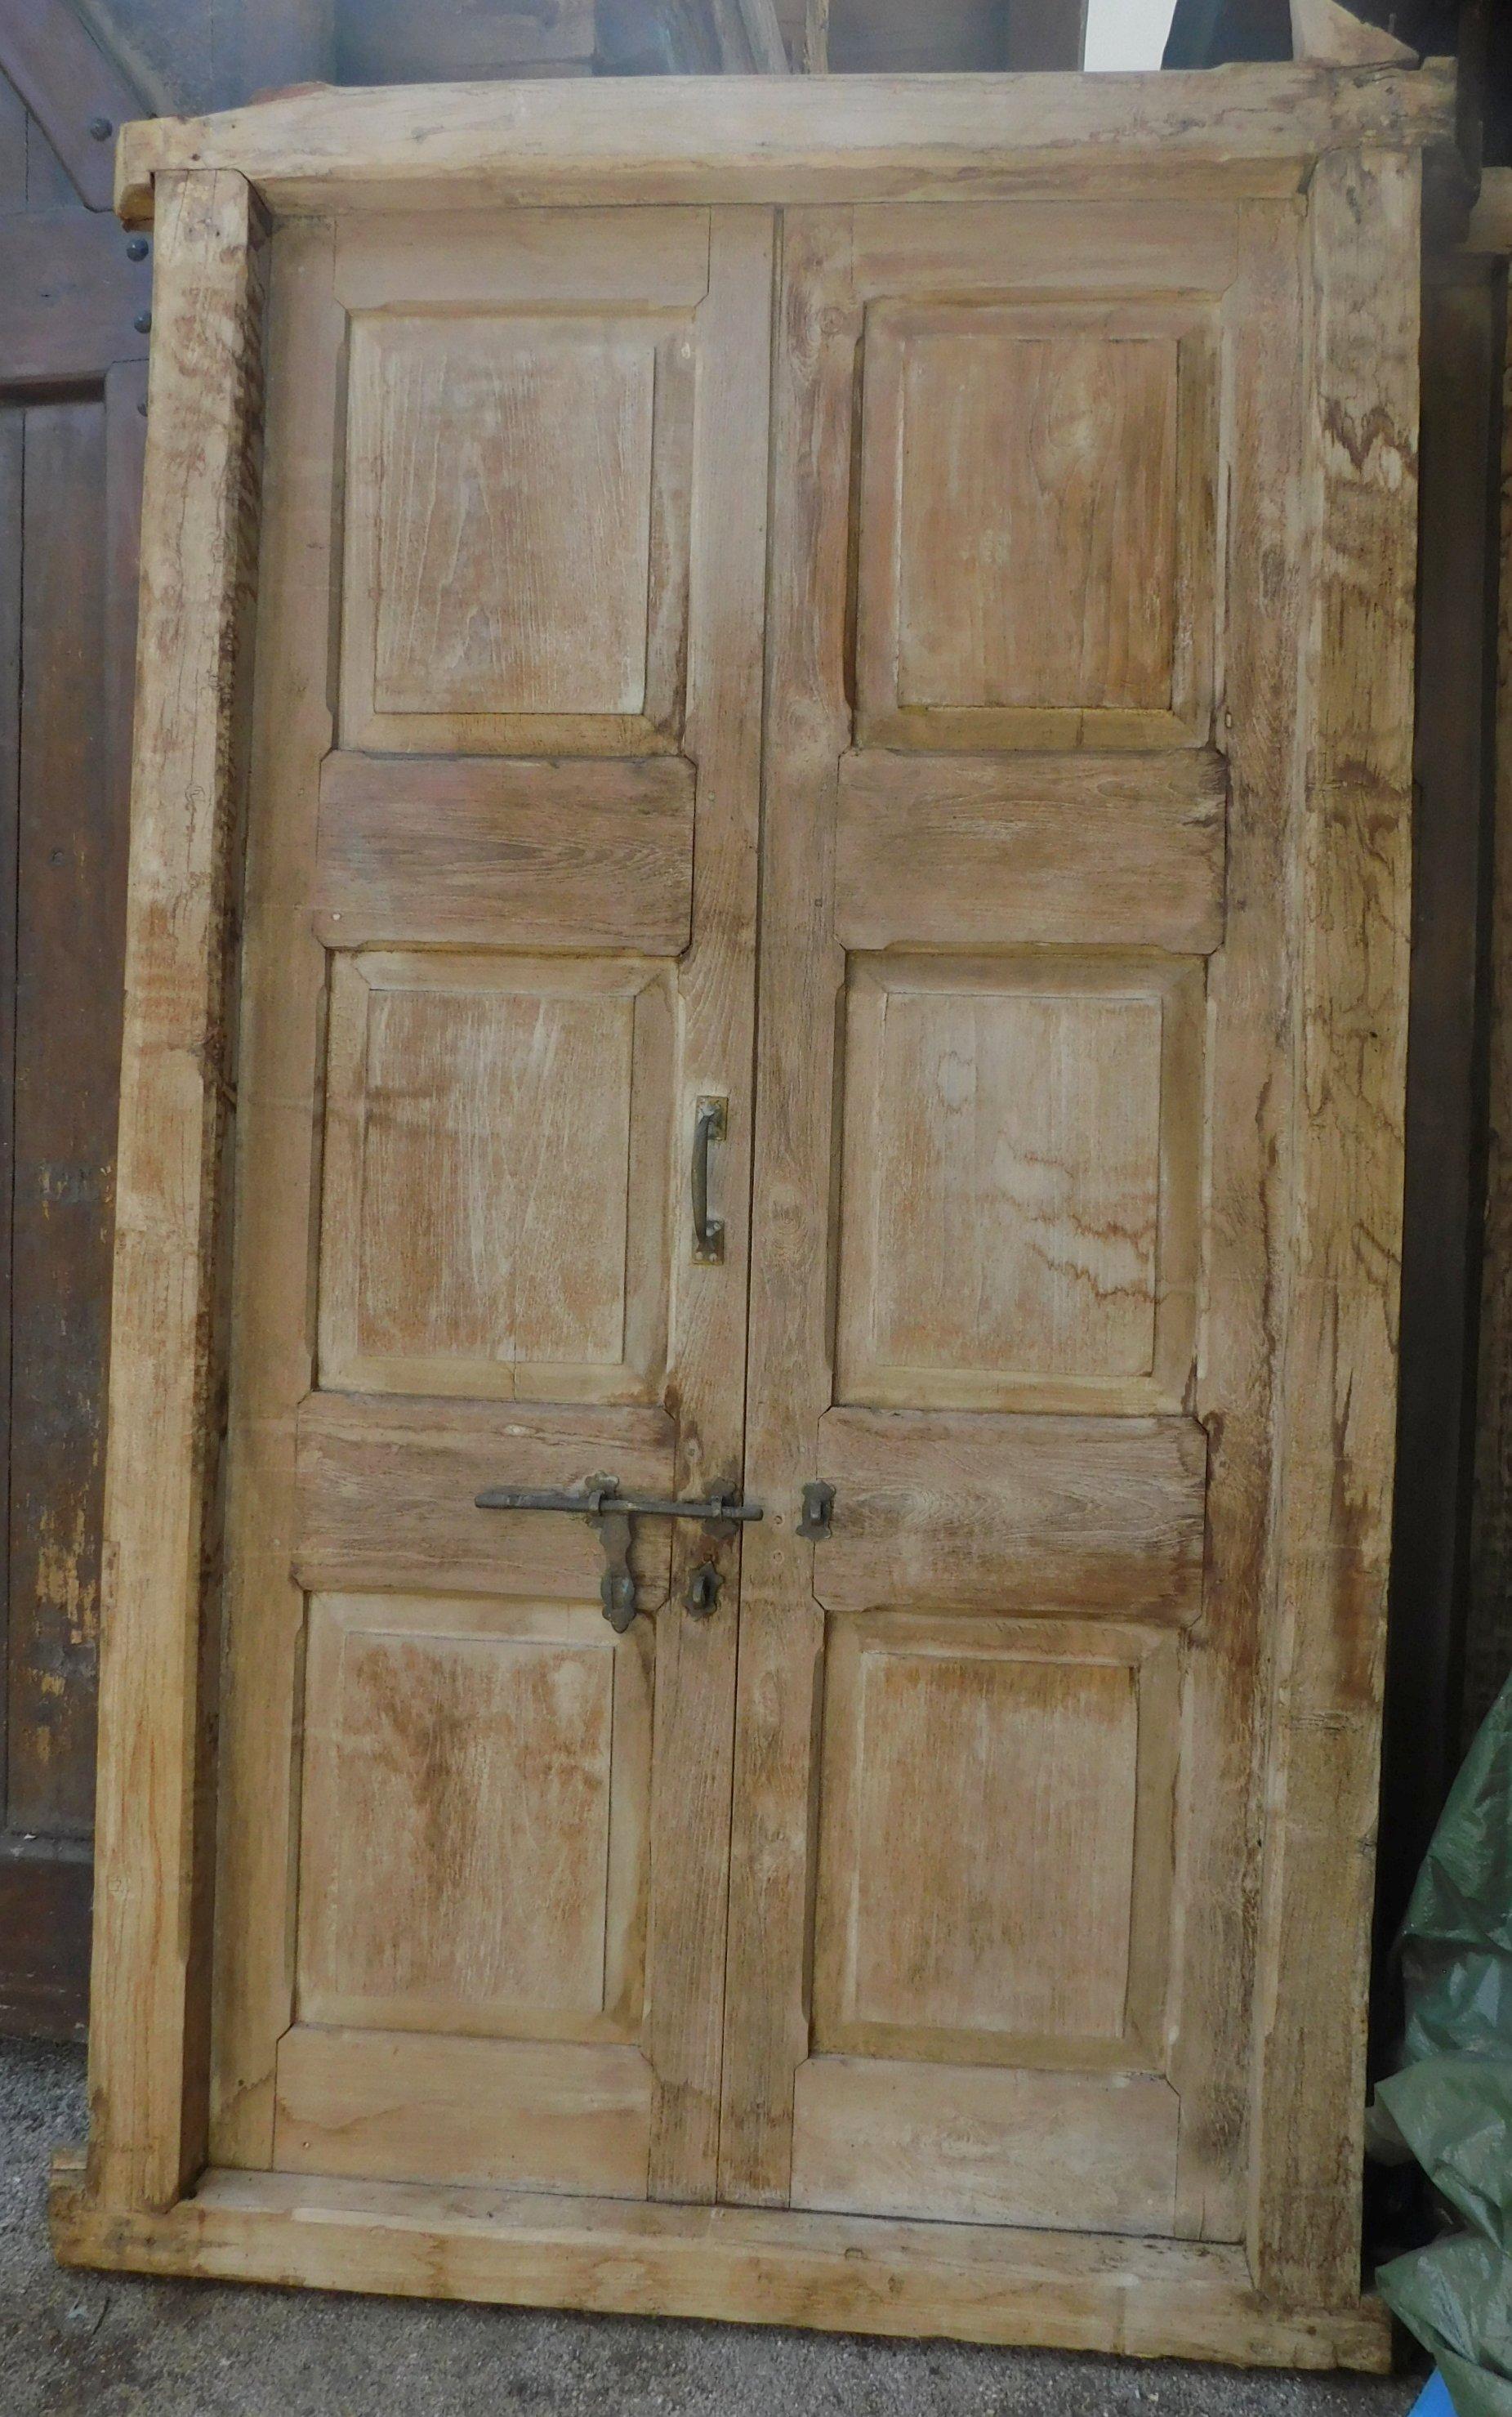 Set of 4 doors complete with frame, hand-carved in Teak wood, they could be used both indoors and outdoors as they are very sturdy, but they have original latch iron, hand-built in India in the second half of the 800 (3 complet with arched